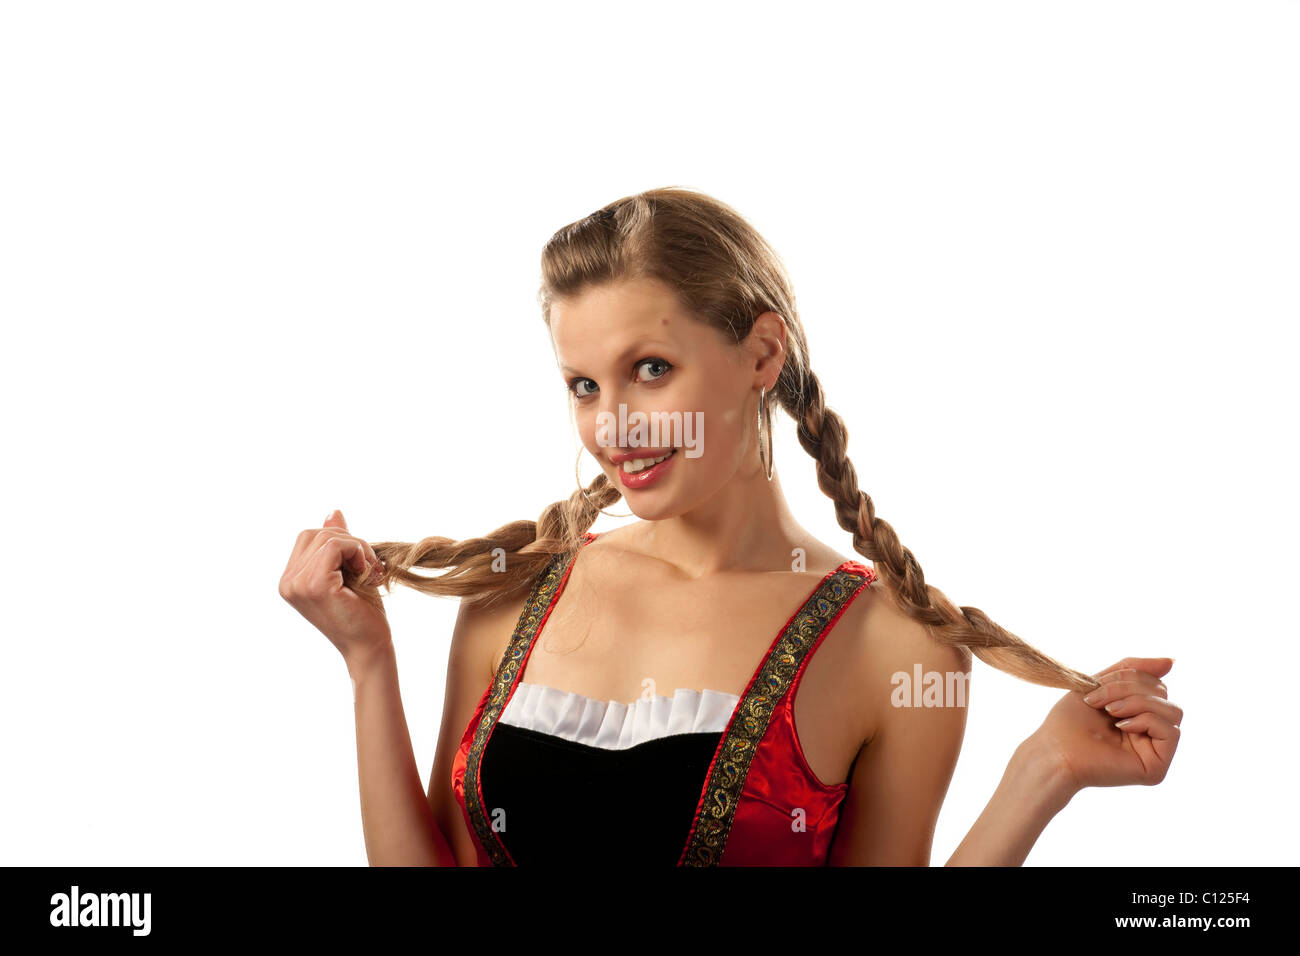 Young woman, 24 years old, with braids, in a short dirndl, cheeky Stock Photo